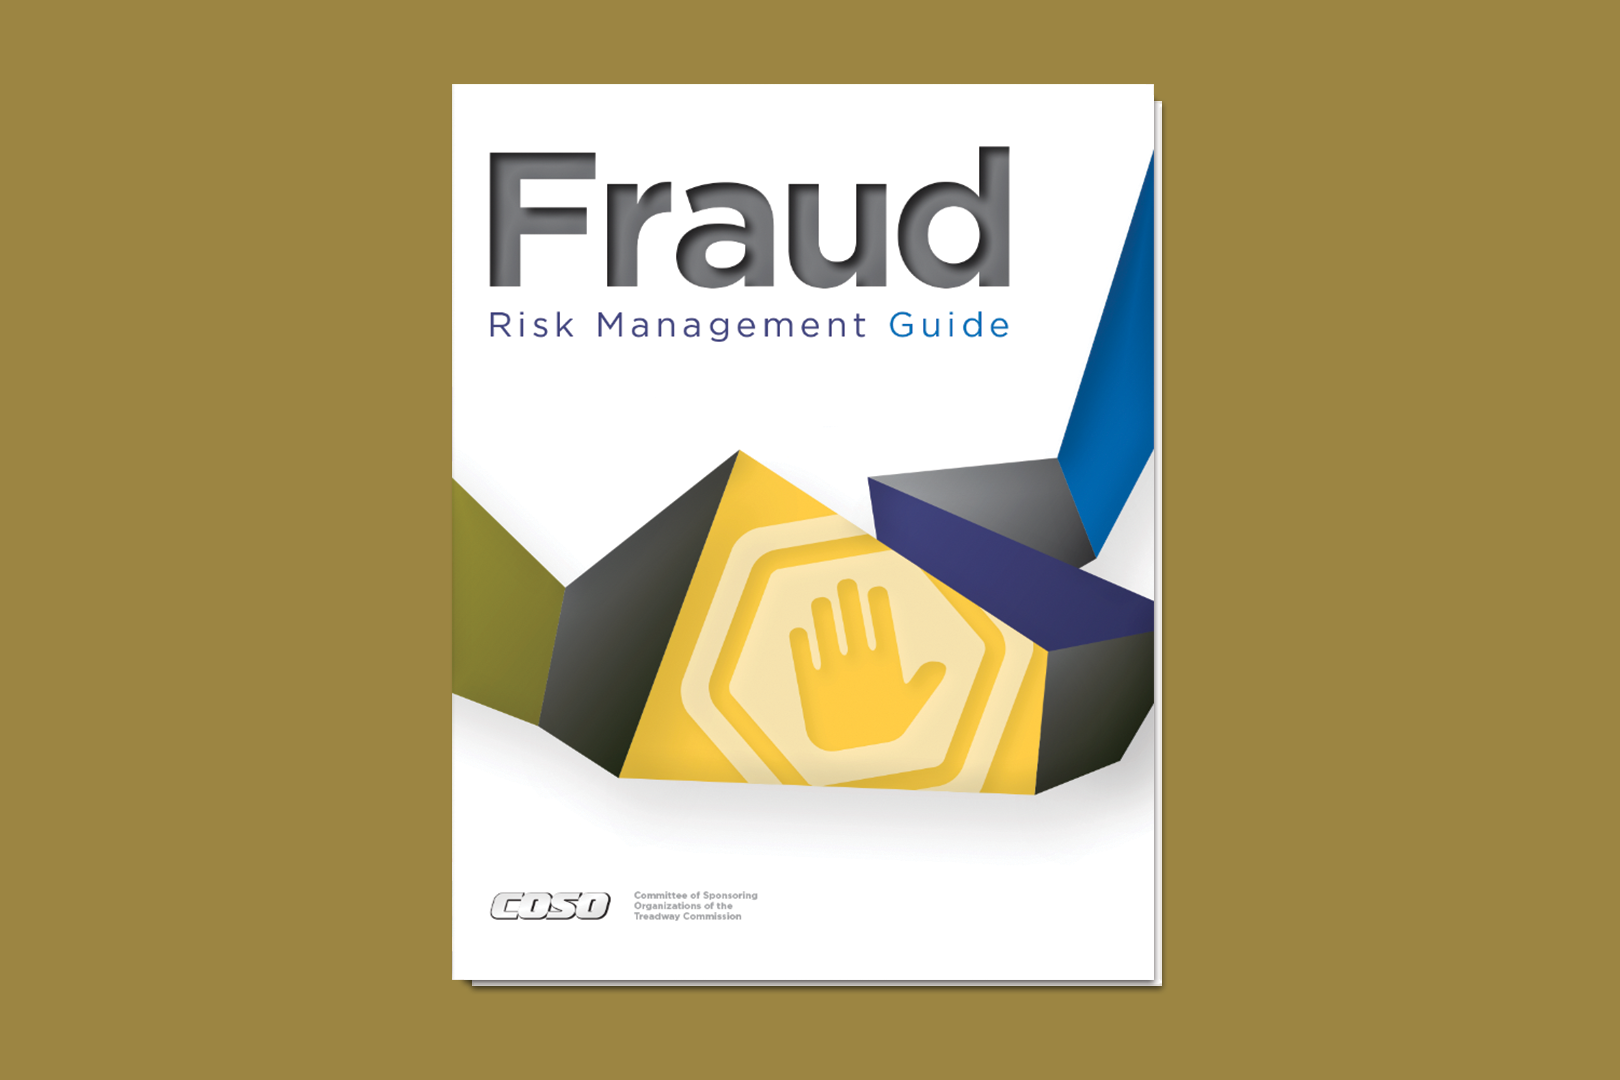 Fraud Risk Management guide cover on a gold background